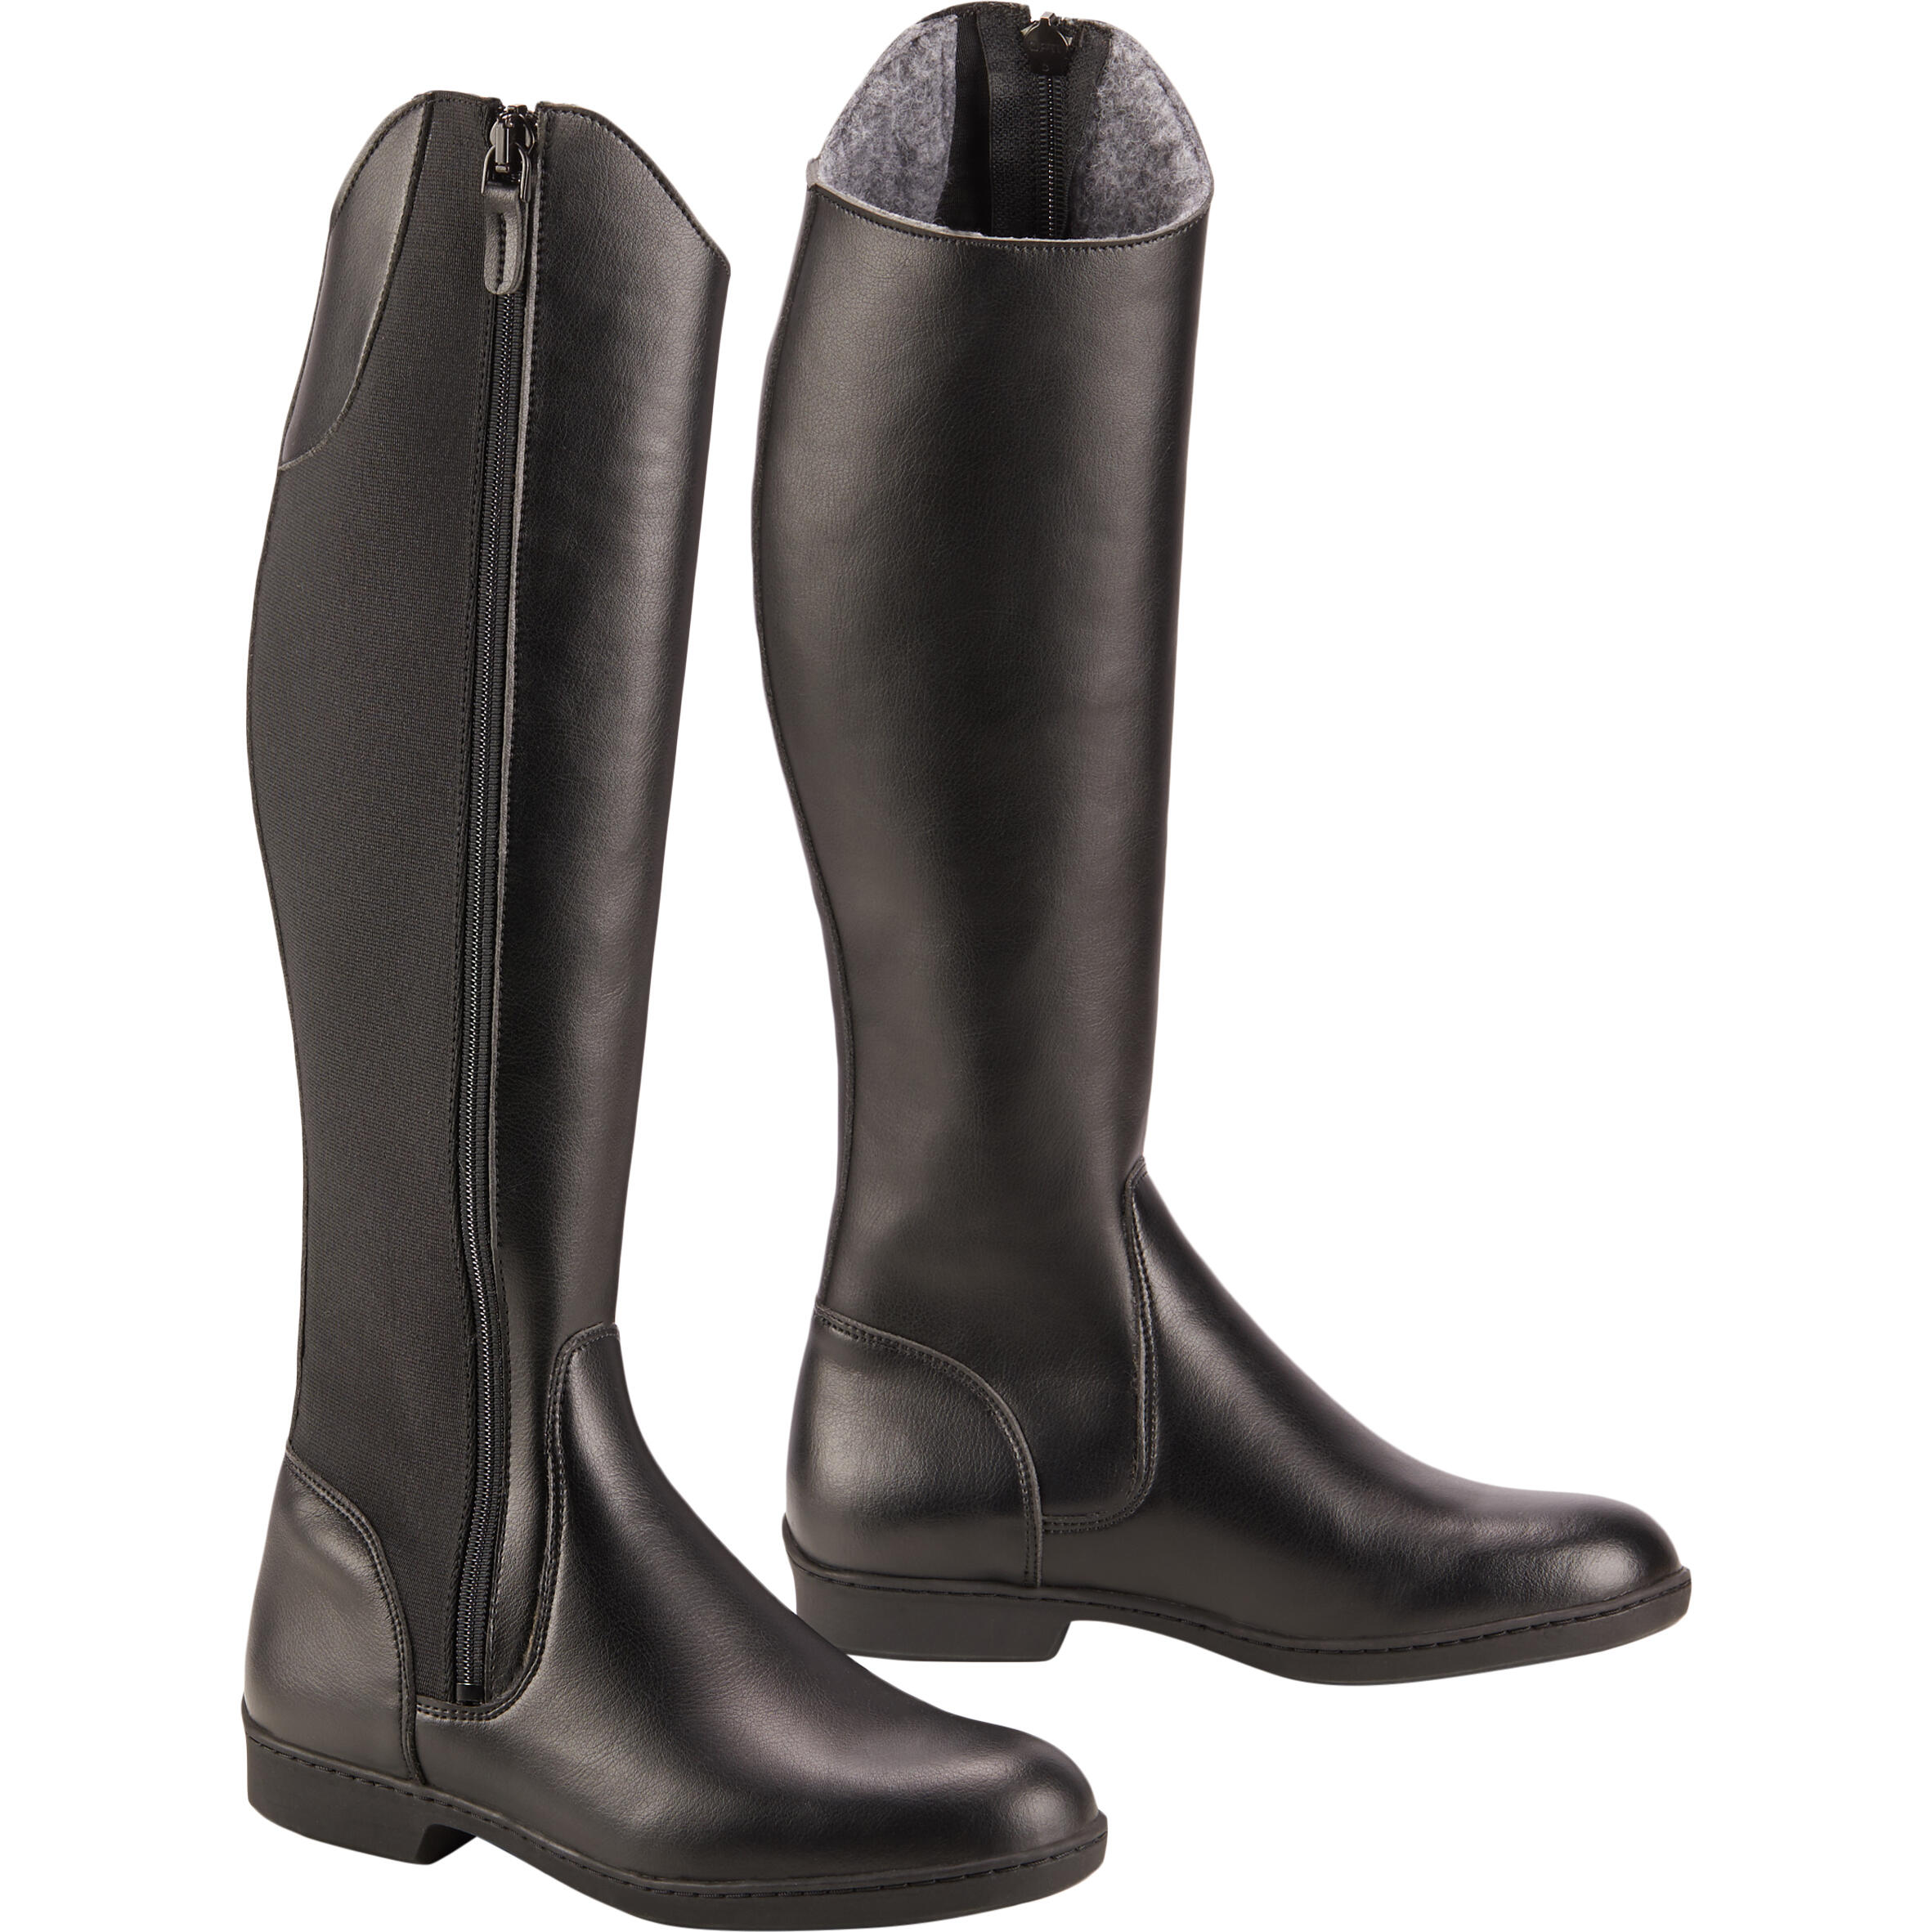 500 Warm Adult Horse Riding  Long Boots - Black 2/7